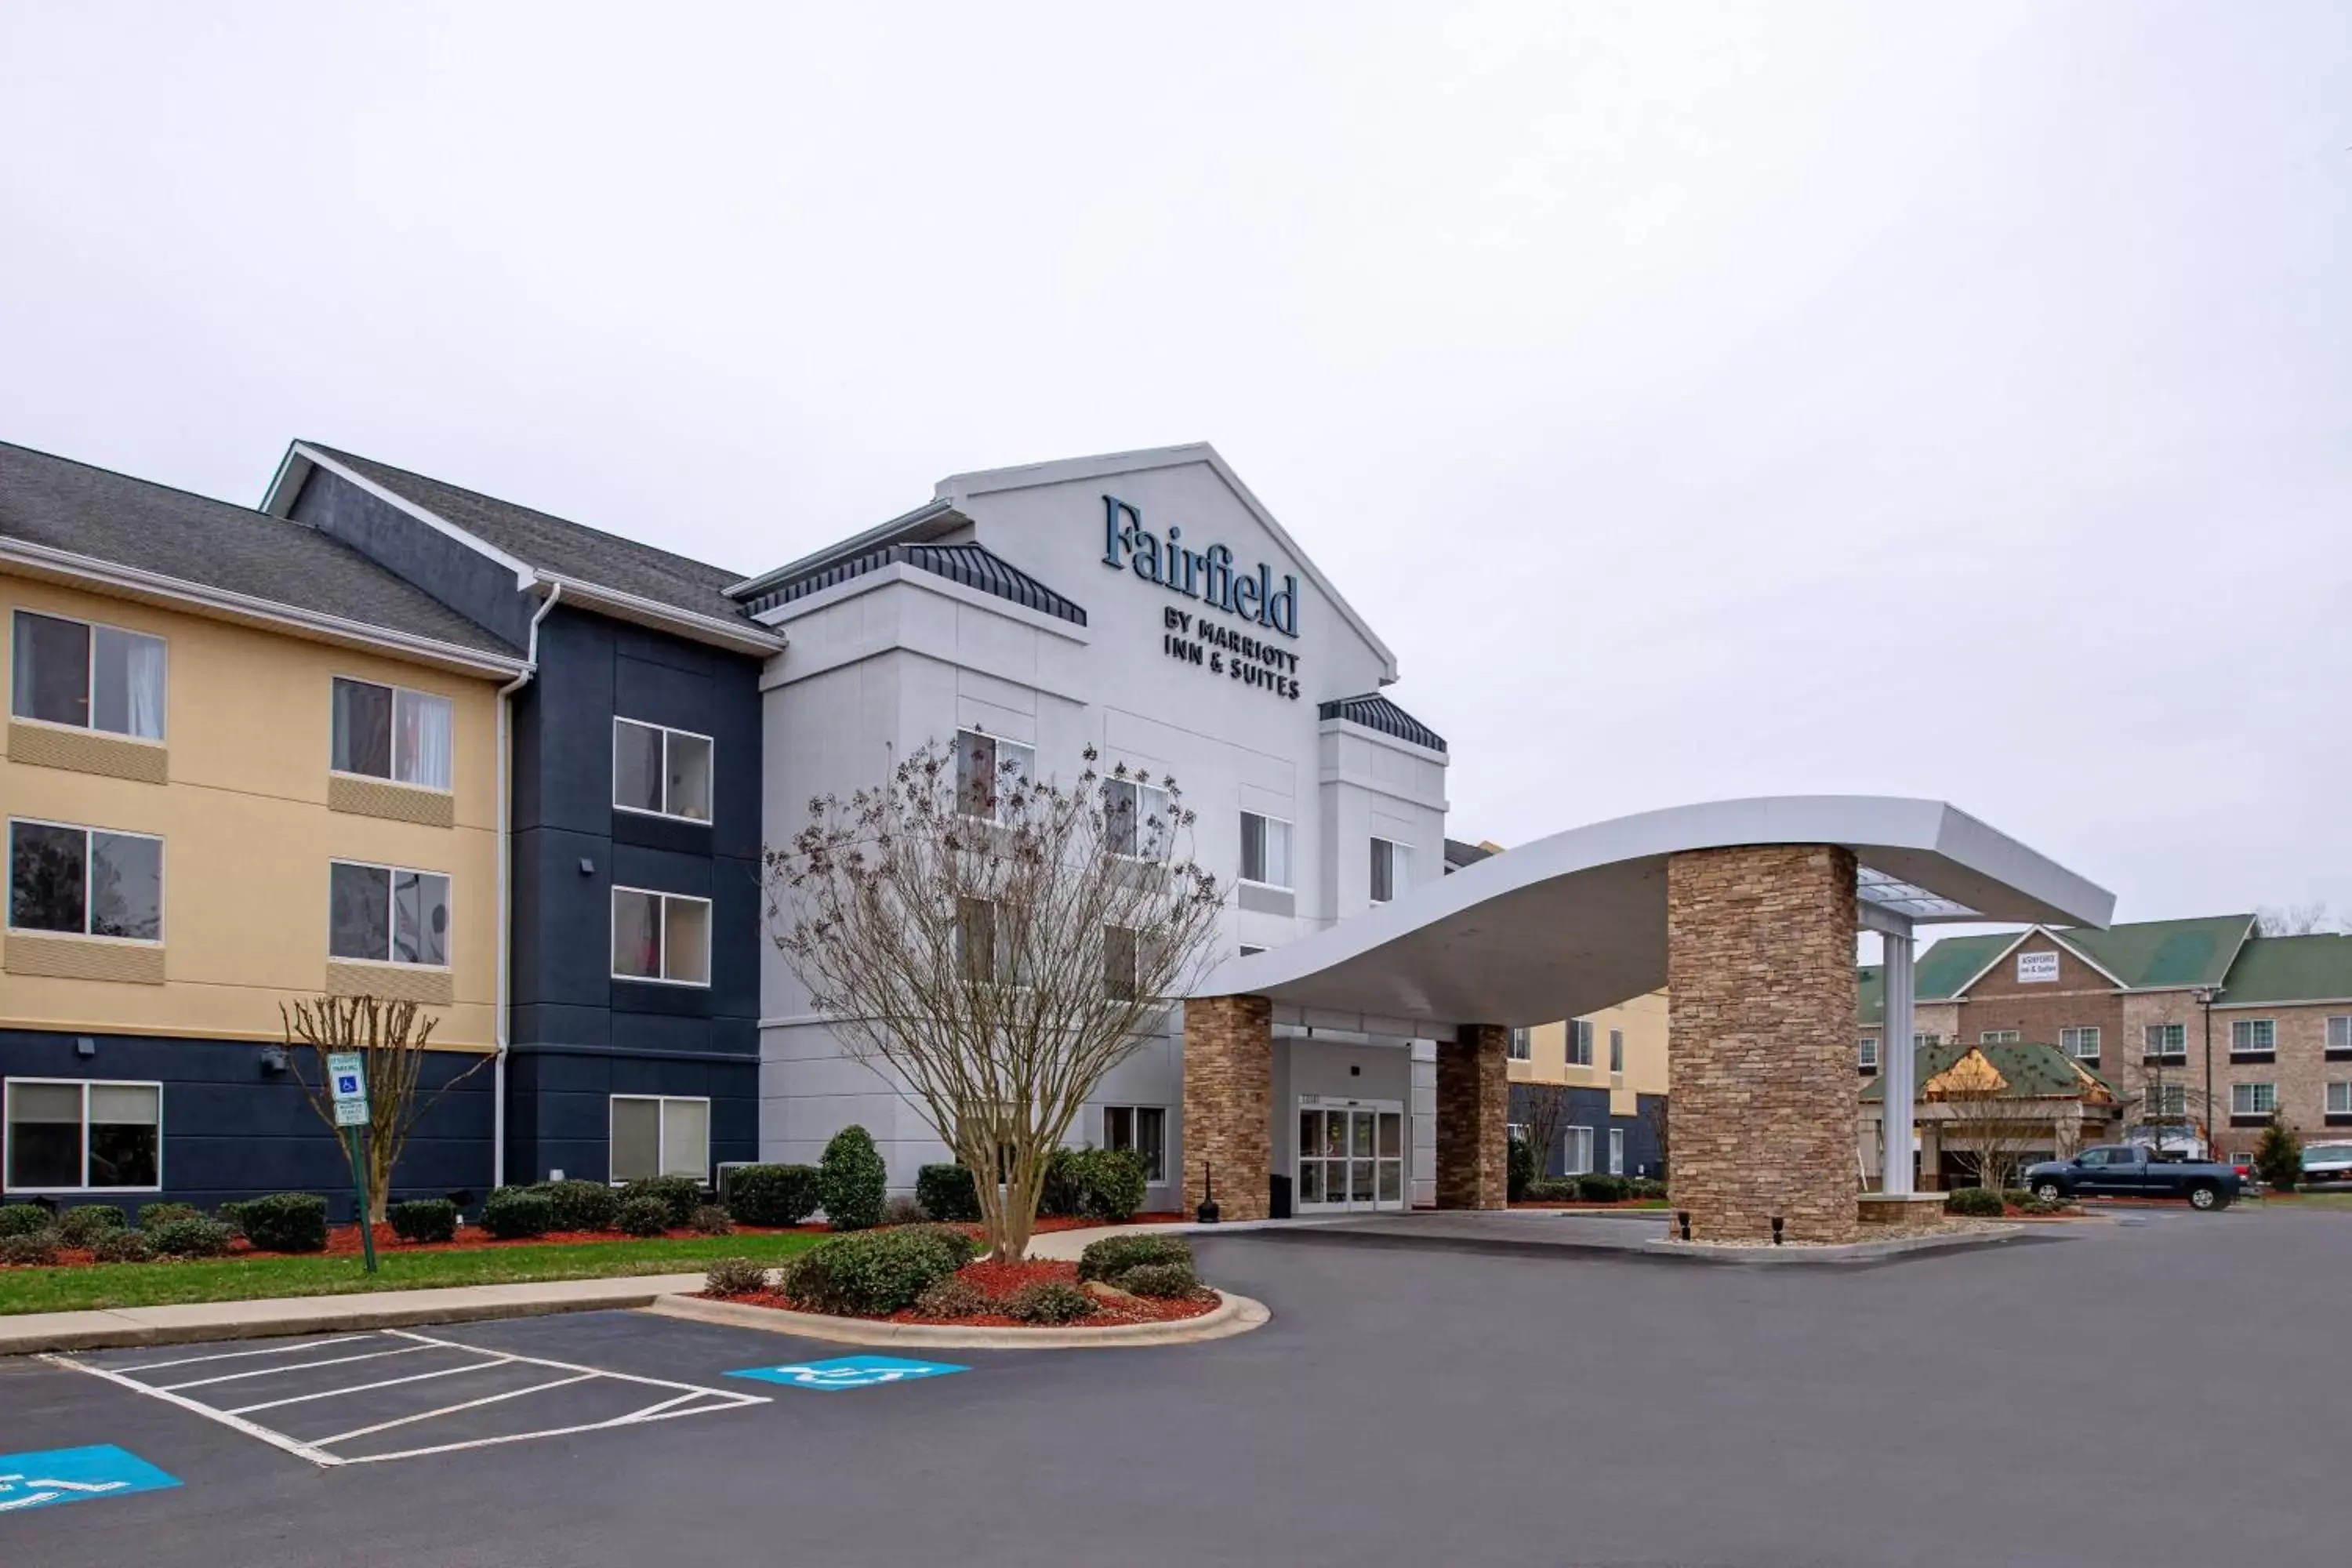 Property Building in Fairfield Inn & Suites High Point Archdale